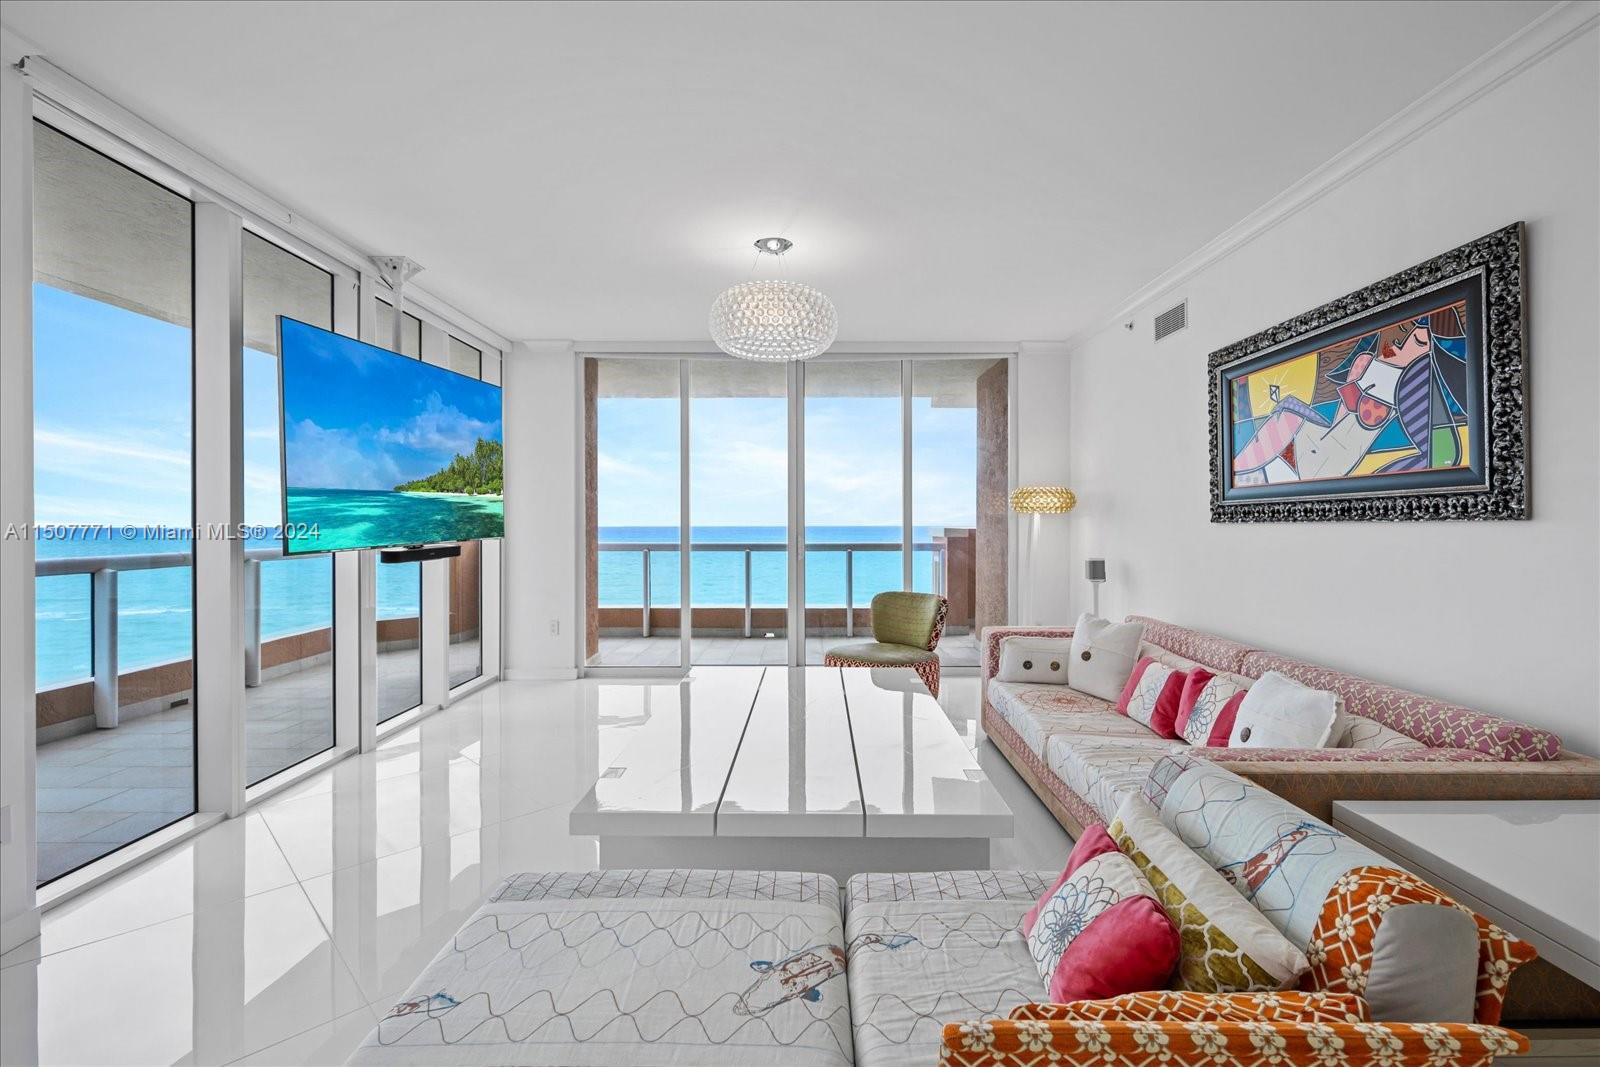 Spectacular oceanfront corner residence, completely upgraded with the most spectacular modern finishes and furnishings. Live at the Acqualina Resort and Spa and enjoy the Five Star, Five Diamond lifestyle Acqualina has to offer. Residence is available for immediate occupancy.